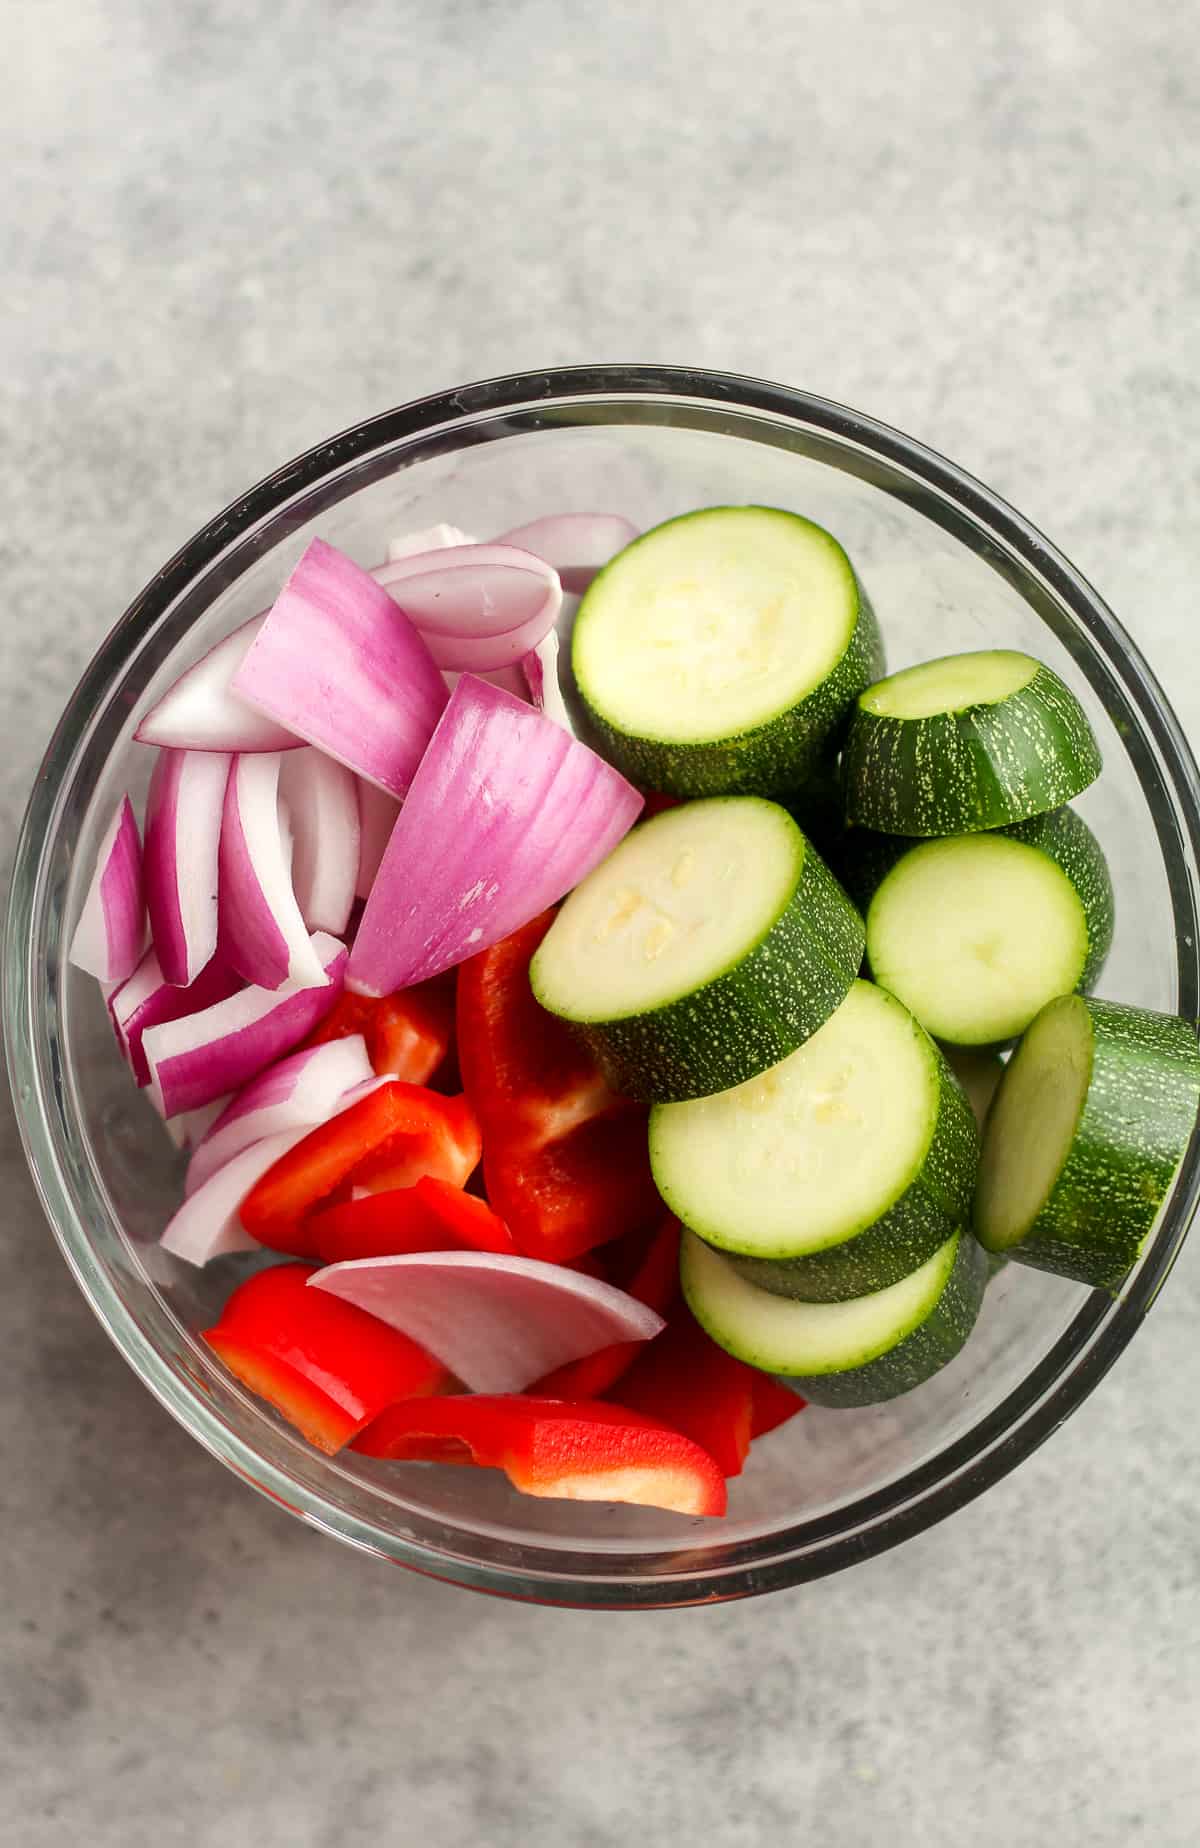 A bowl of the chopped veggies for the kabobs.